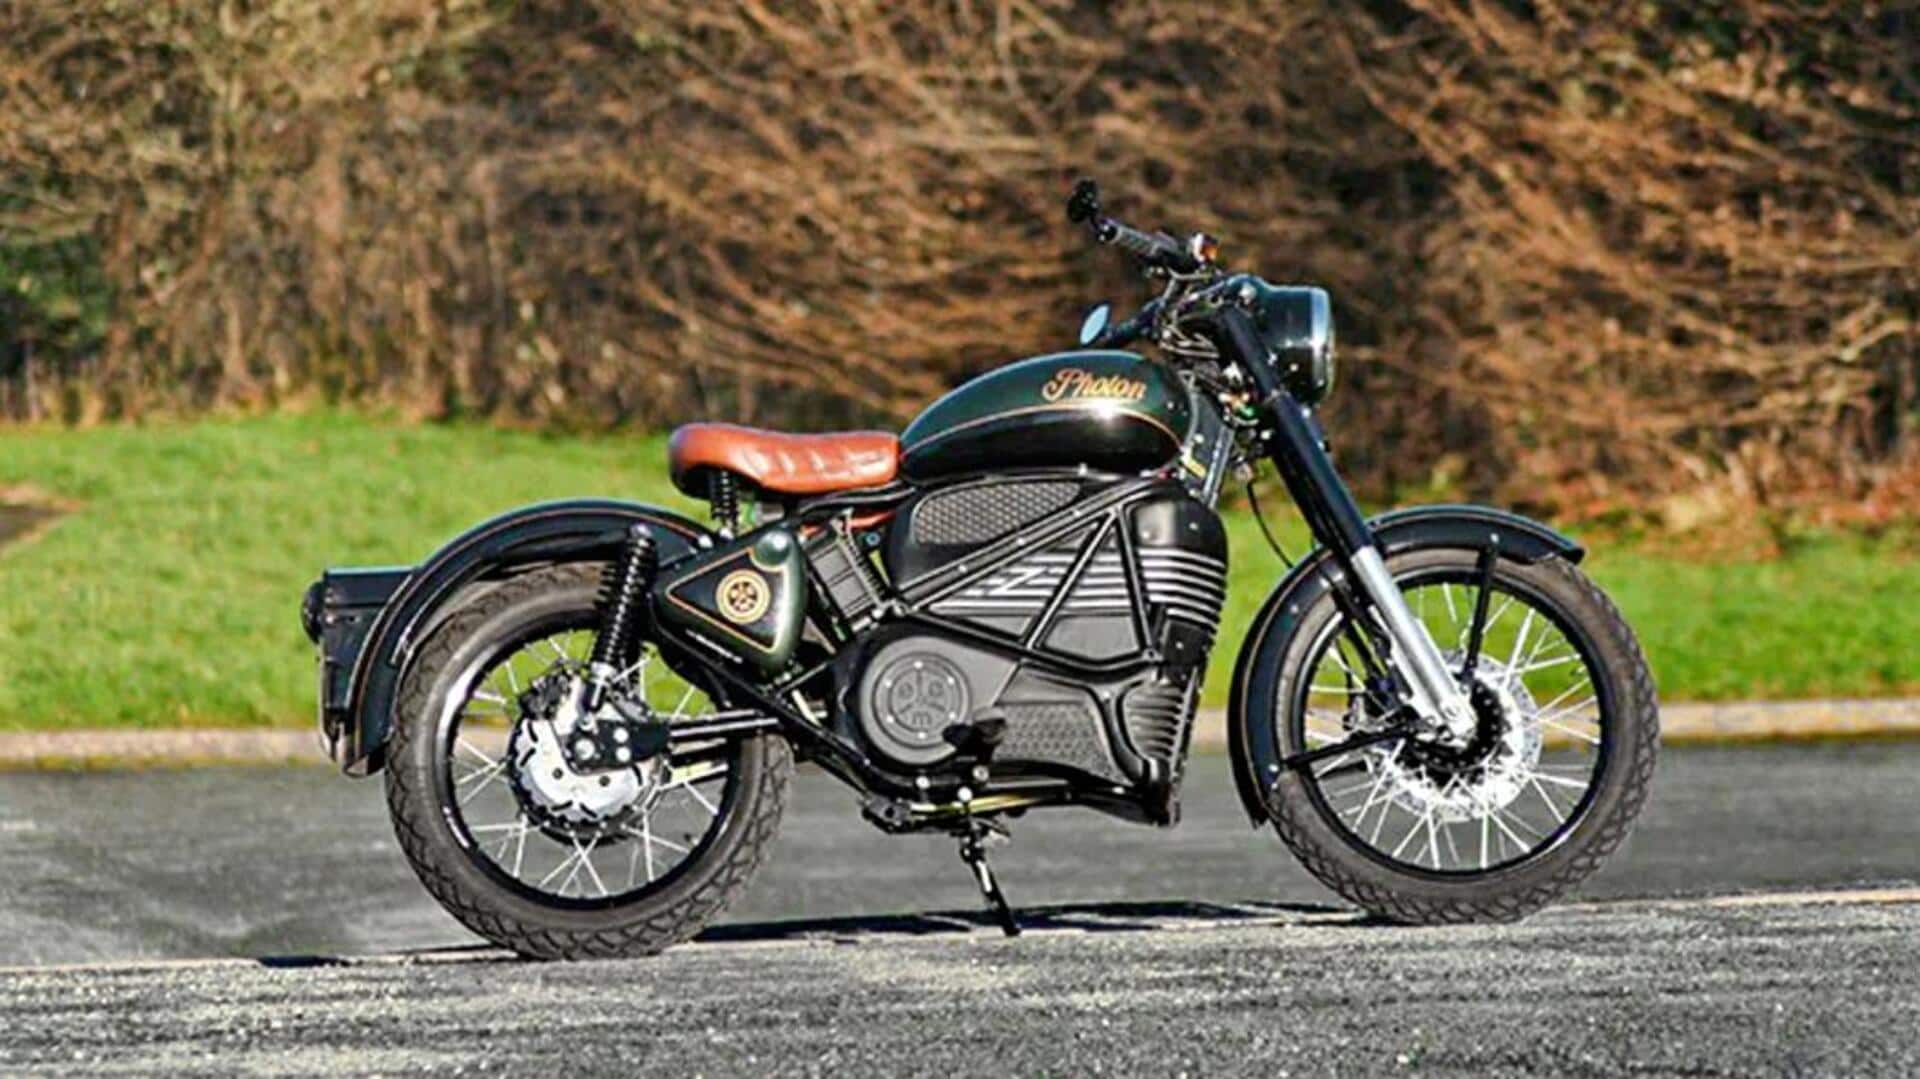 Royal Enfield to enter the Indian EV market in 2025